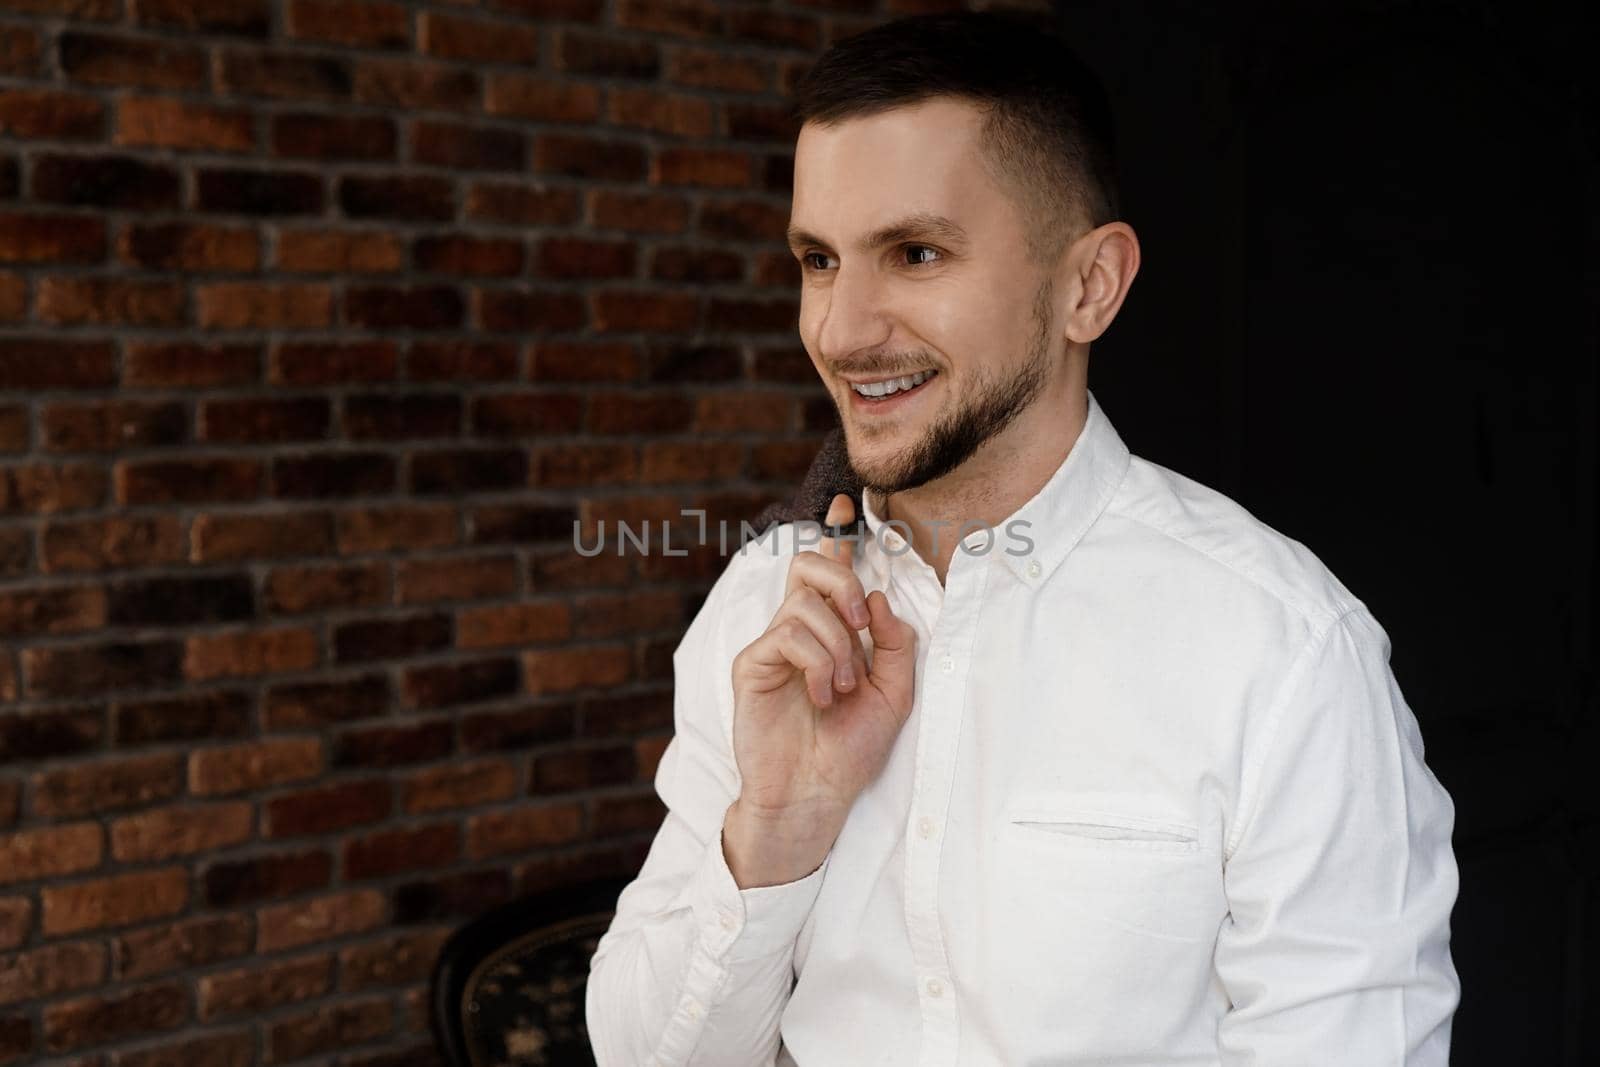 Stylish young businessman in white shirt is smiling and holding a jacket on finger, standing against brick wall